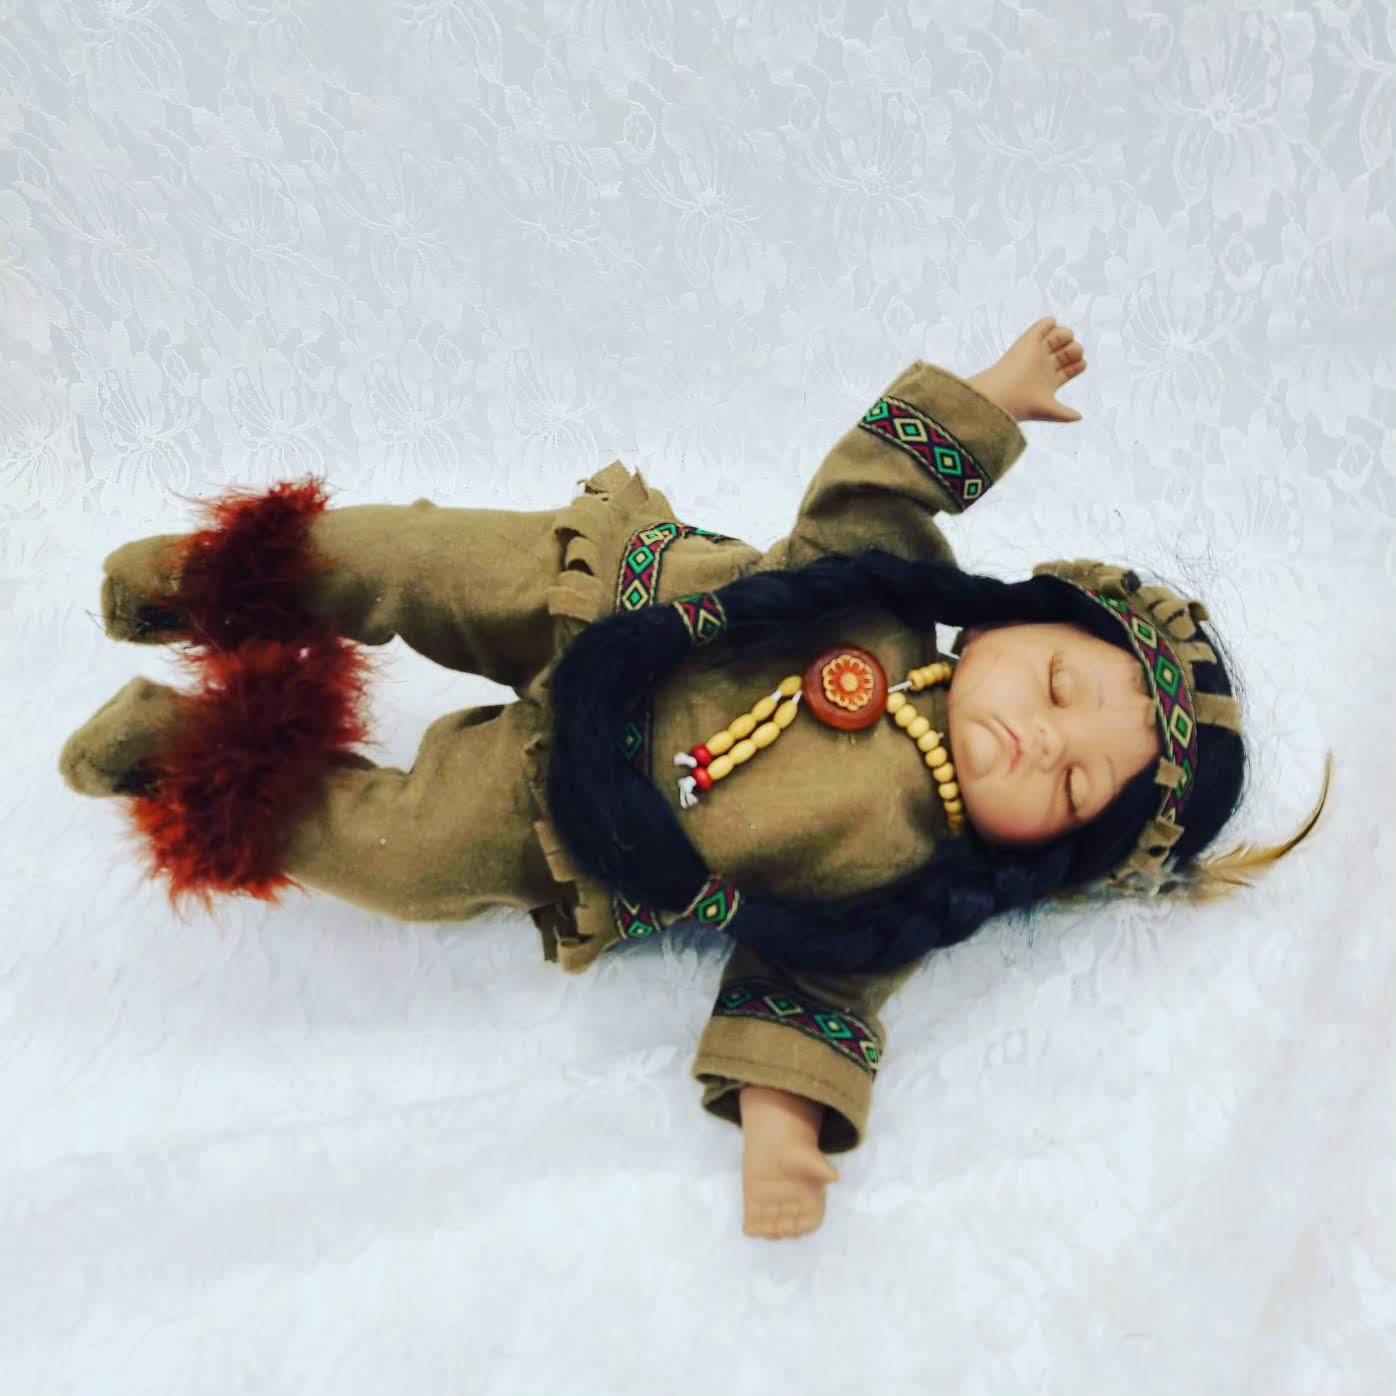 Water (Lushootseed word: qwuʔ) Haunted Doll ~ 17" Sleeping Native American Child Doll ~ Paranormal ~ Tulalip/Skagit Tribe 1890ish ~ OLD SOUL ~  Clairsentient ~ Water and Earth